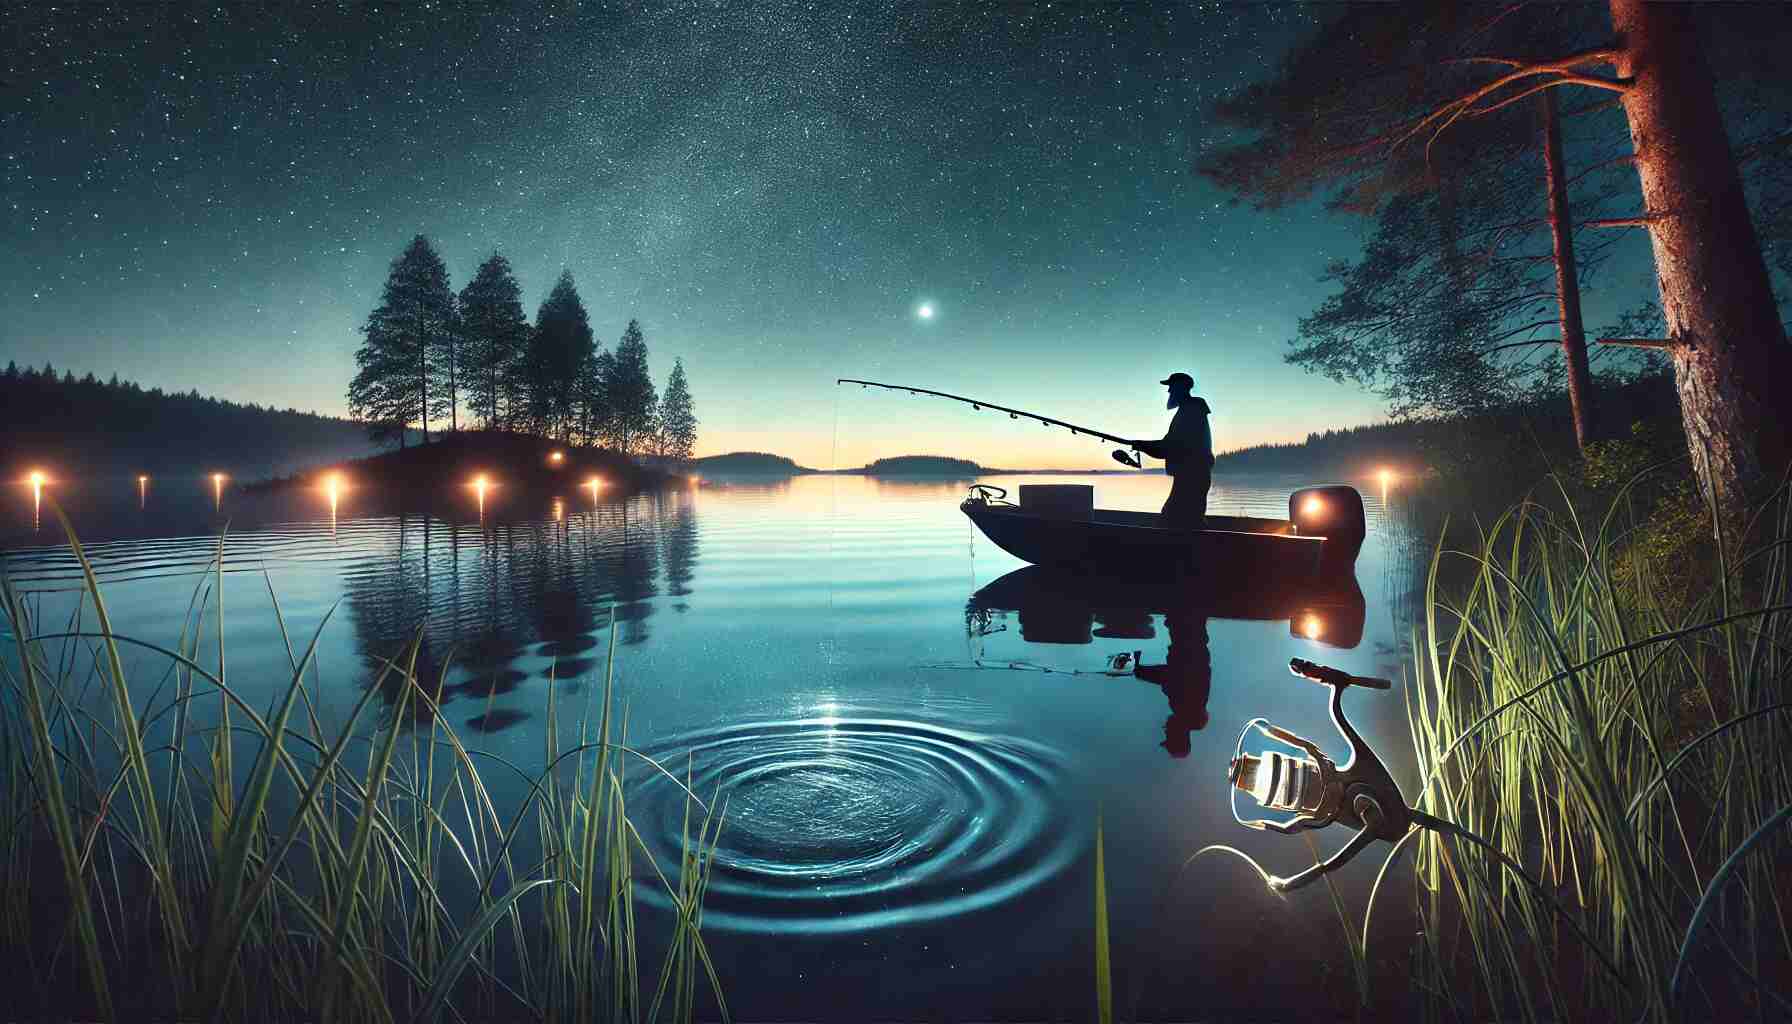 A serene night fishing scene in summer with an angler on a boat casting a line under a starry sky. The water is illuminated with soft, glowing lights, and the shoreline features silhouetted trees and calm waters reflecting the night sky. The angler is equipped with essential gear like a headlamp and tackle box, creating an inviting atmosphere for a successful night fishing experience.